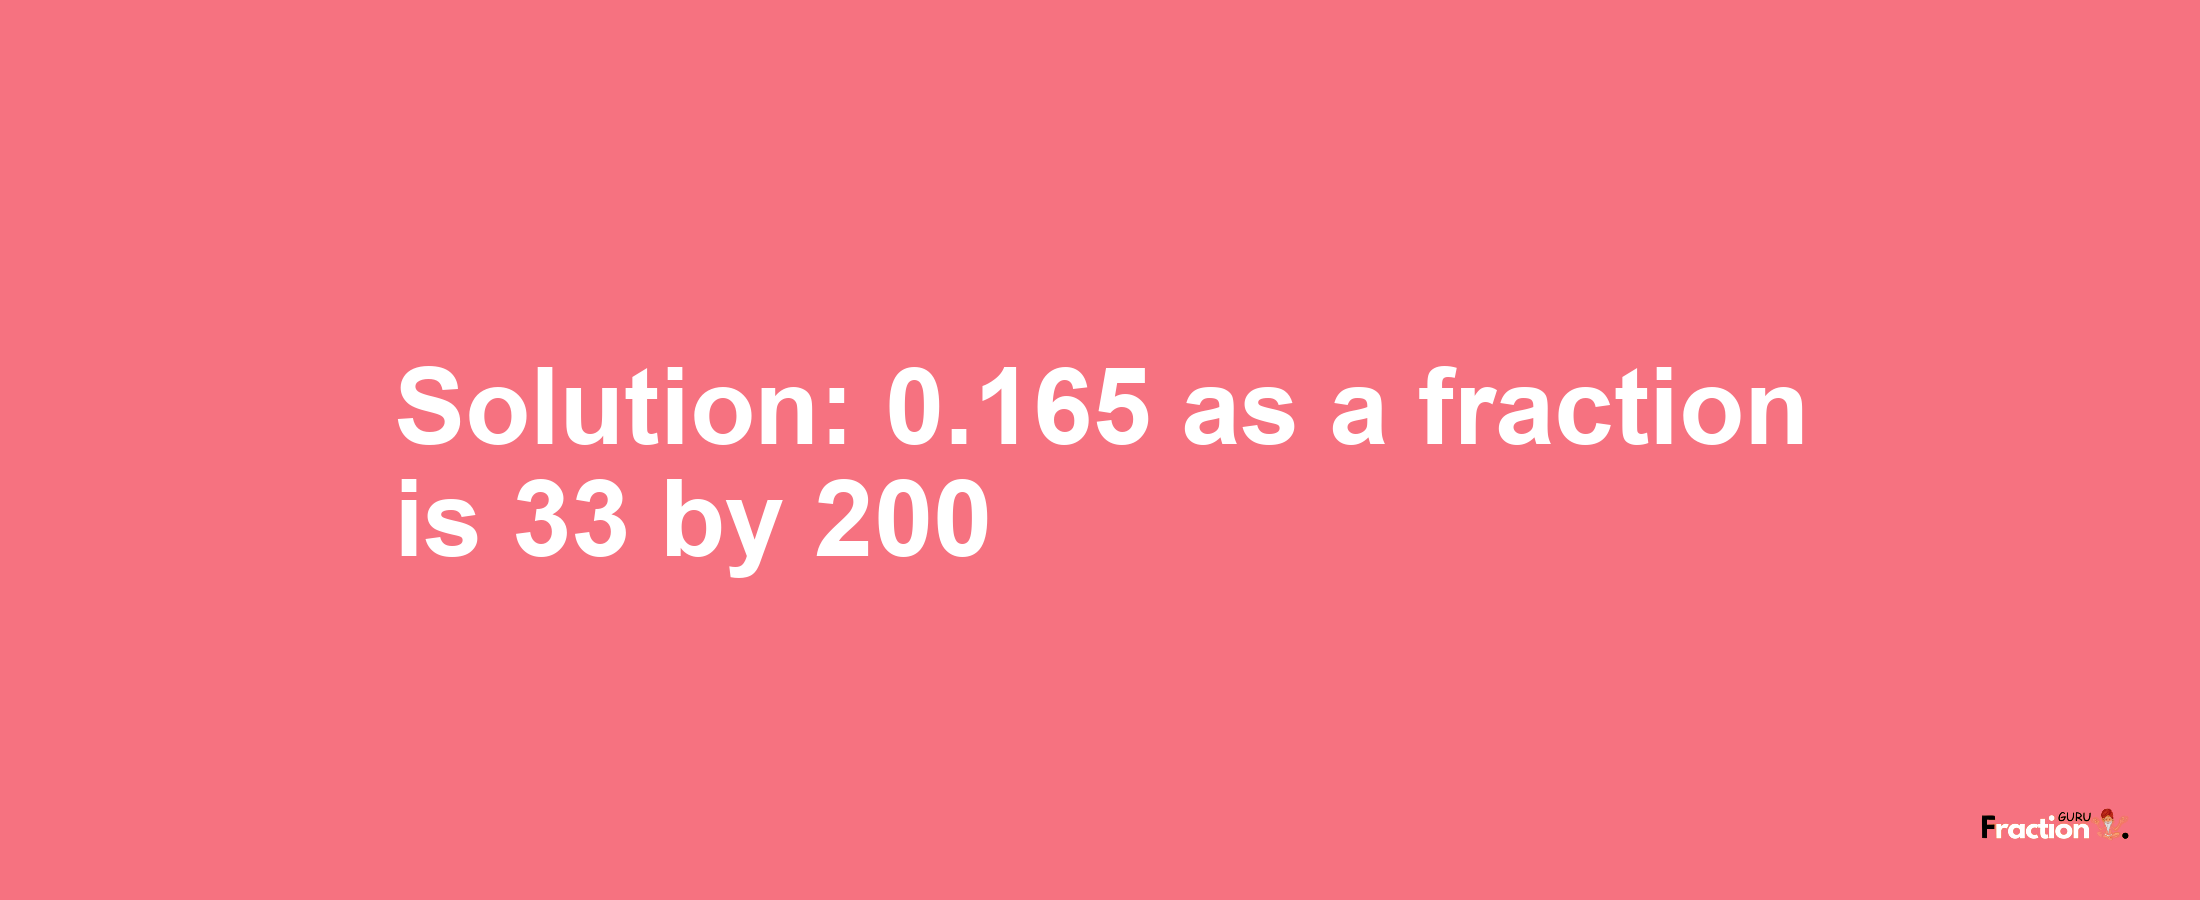 Solution:0.165 as a fraction is 33/200